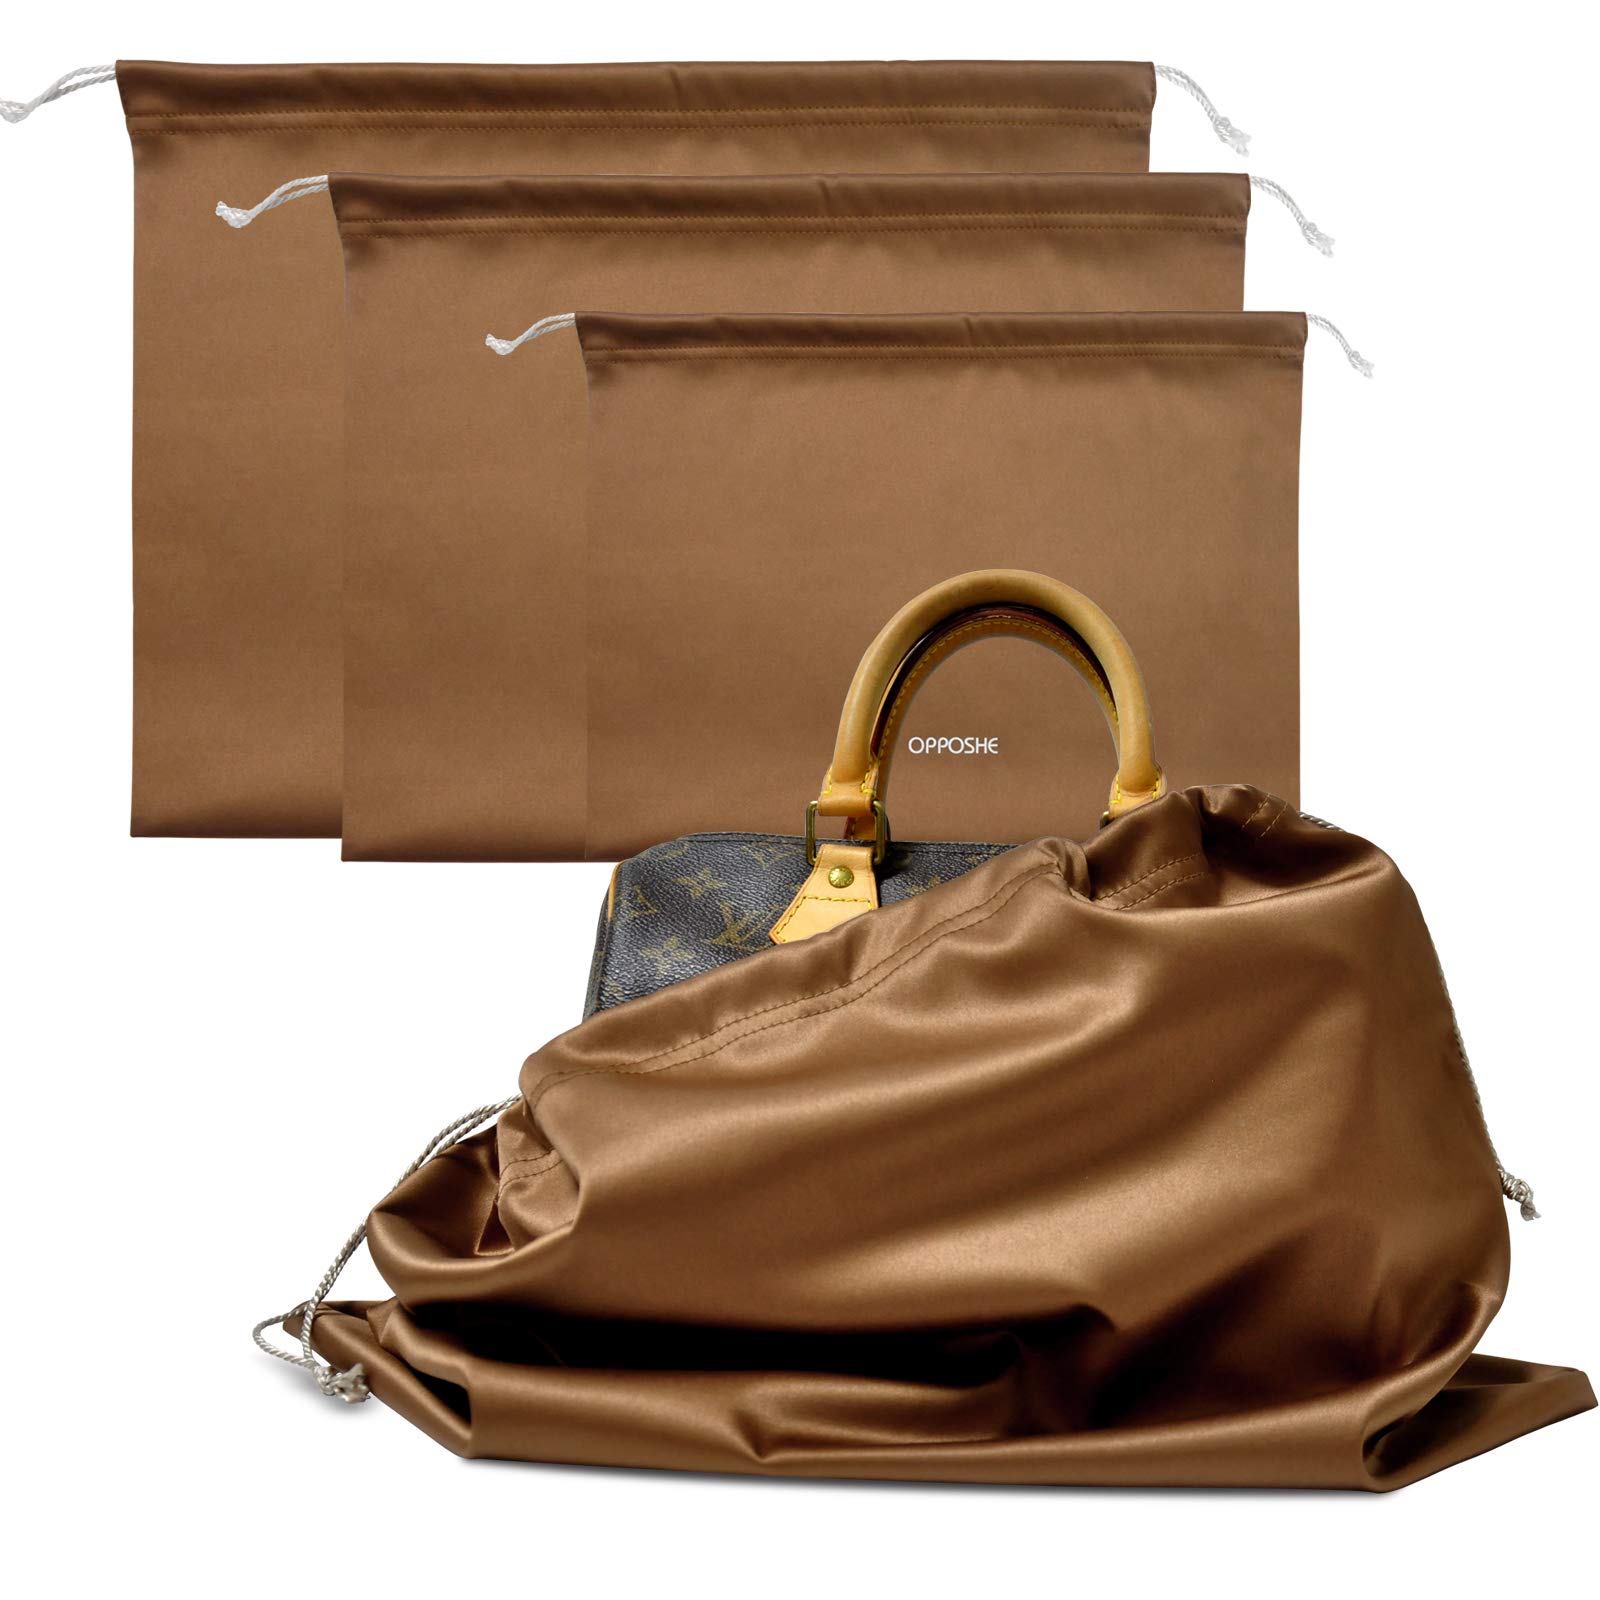 Satin Pillow Luxury Bag Shaper For Louis Vuitton Neverfull PM/MM/GM  (Chocolate Brown) (More colors available)